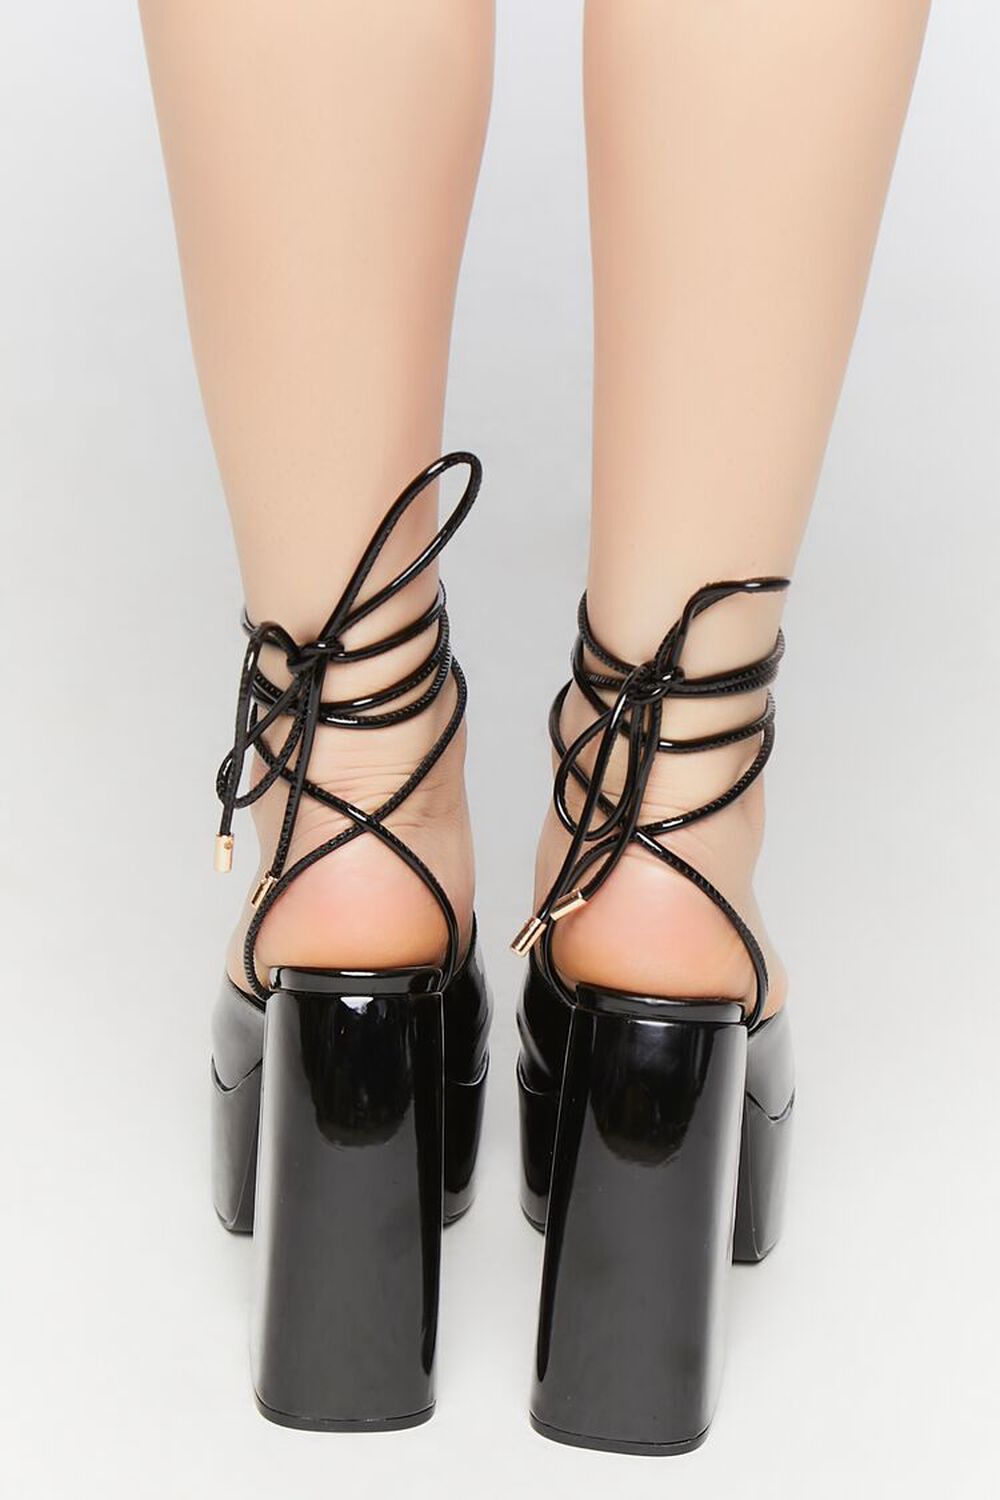 BLACK Faux Patent Leather Lace-Up Heels, image 3